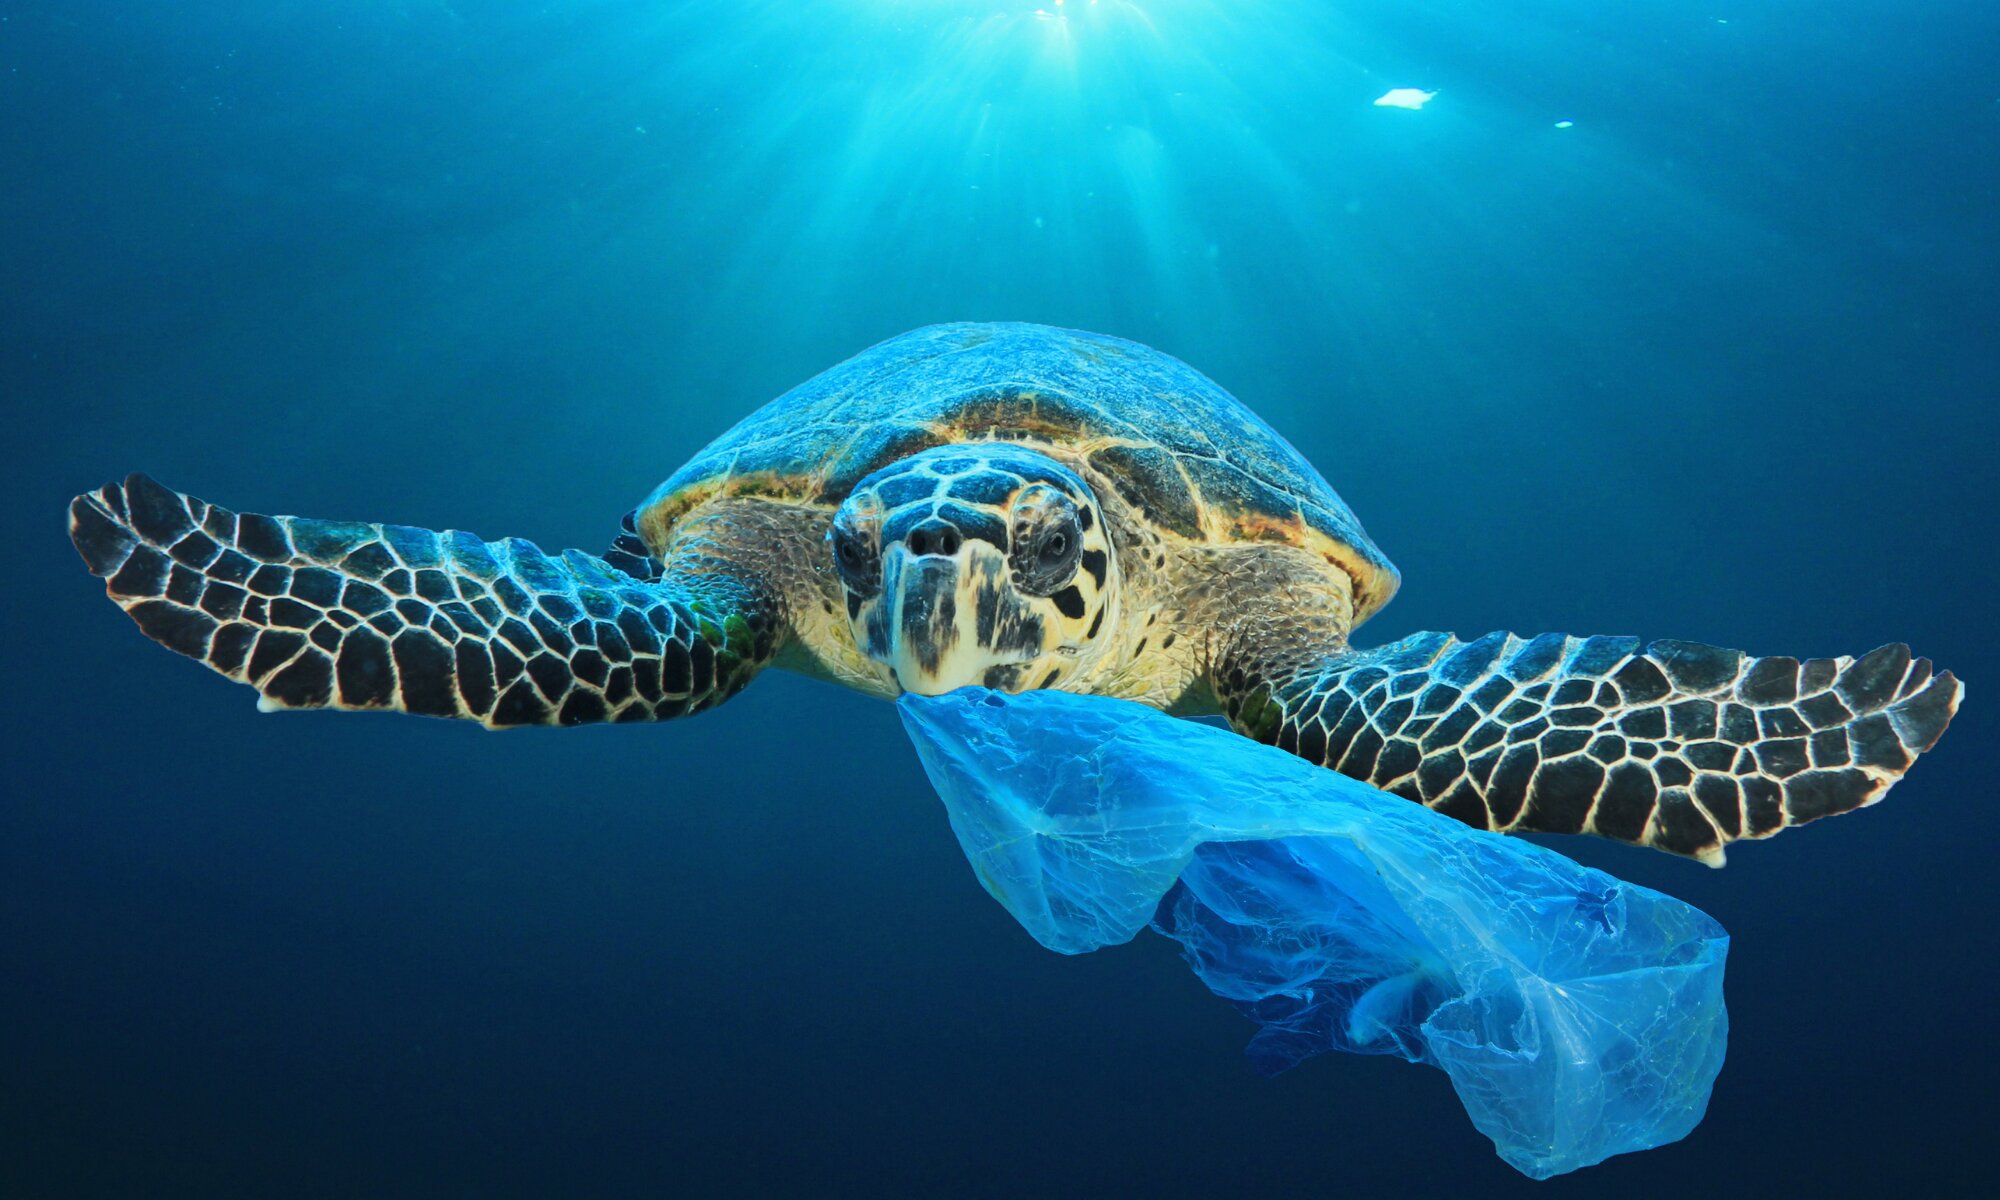 Ocean plastics: The ecological disaster of our time